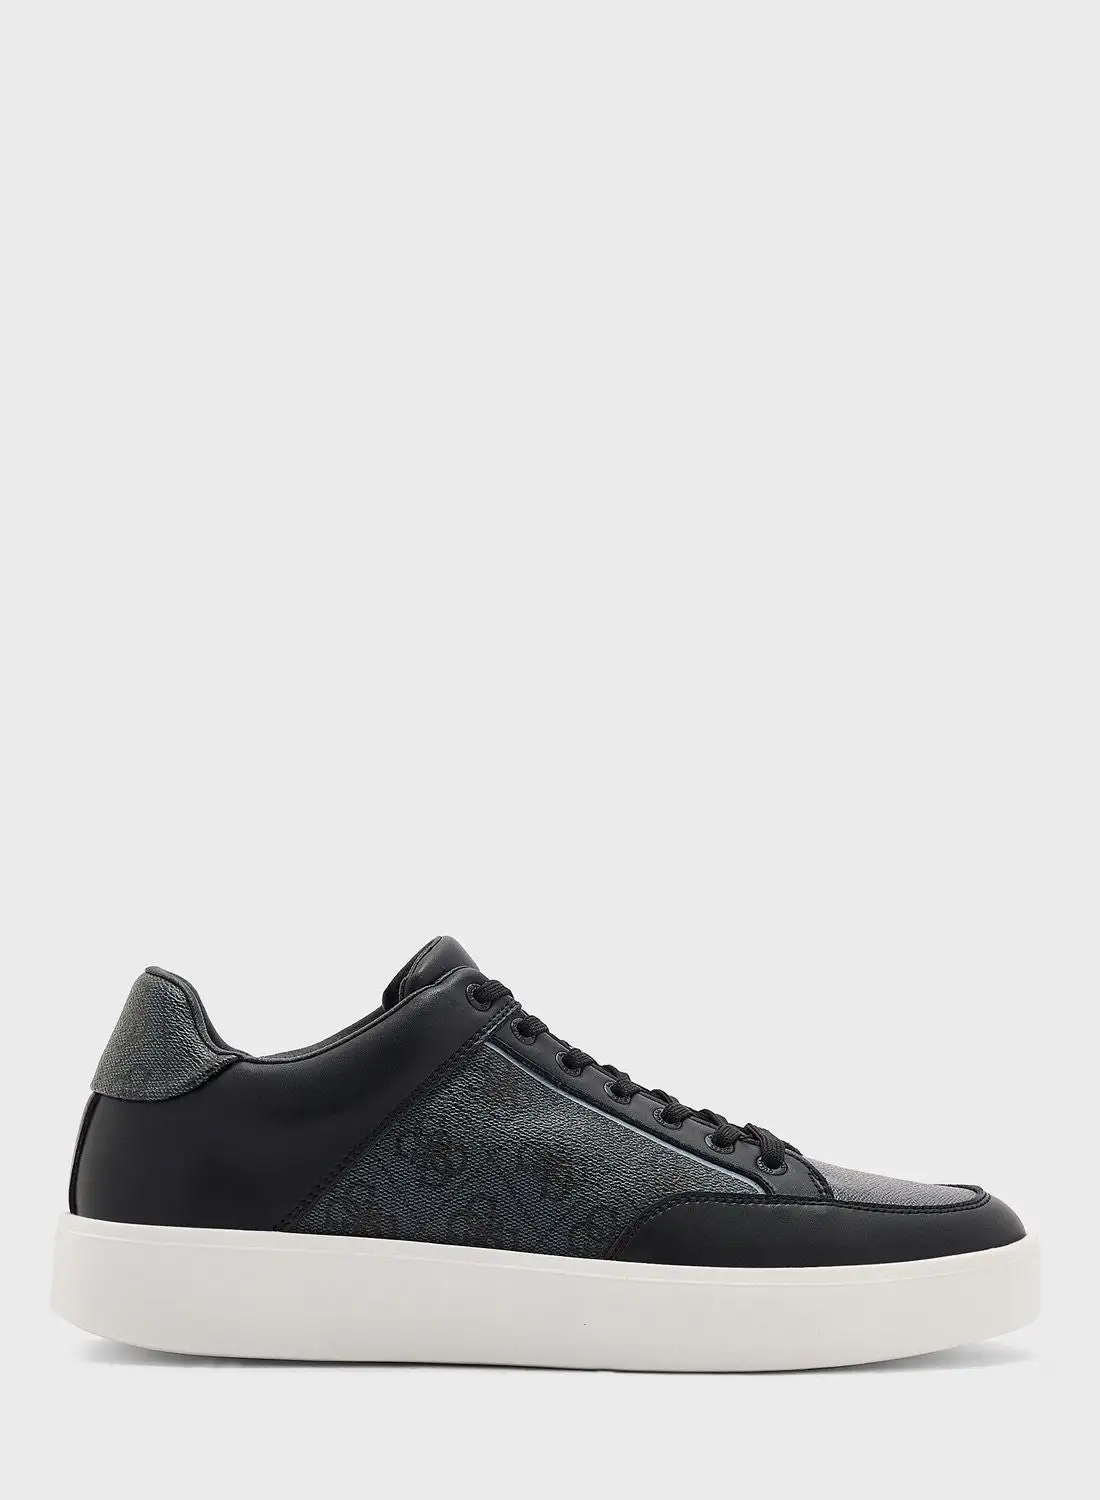 GUESS Casual Low Top Sneakers